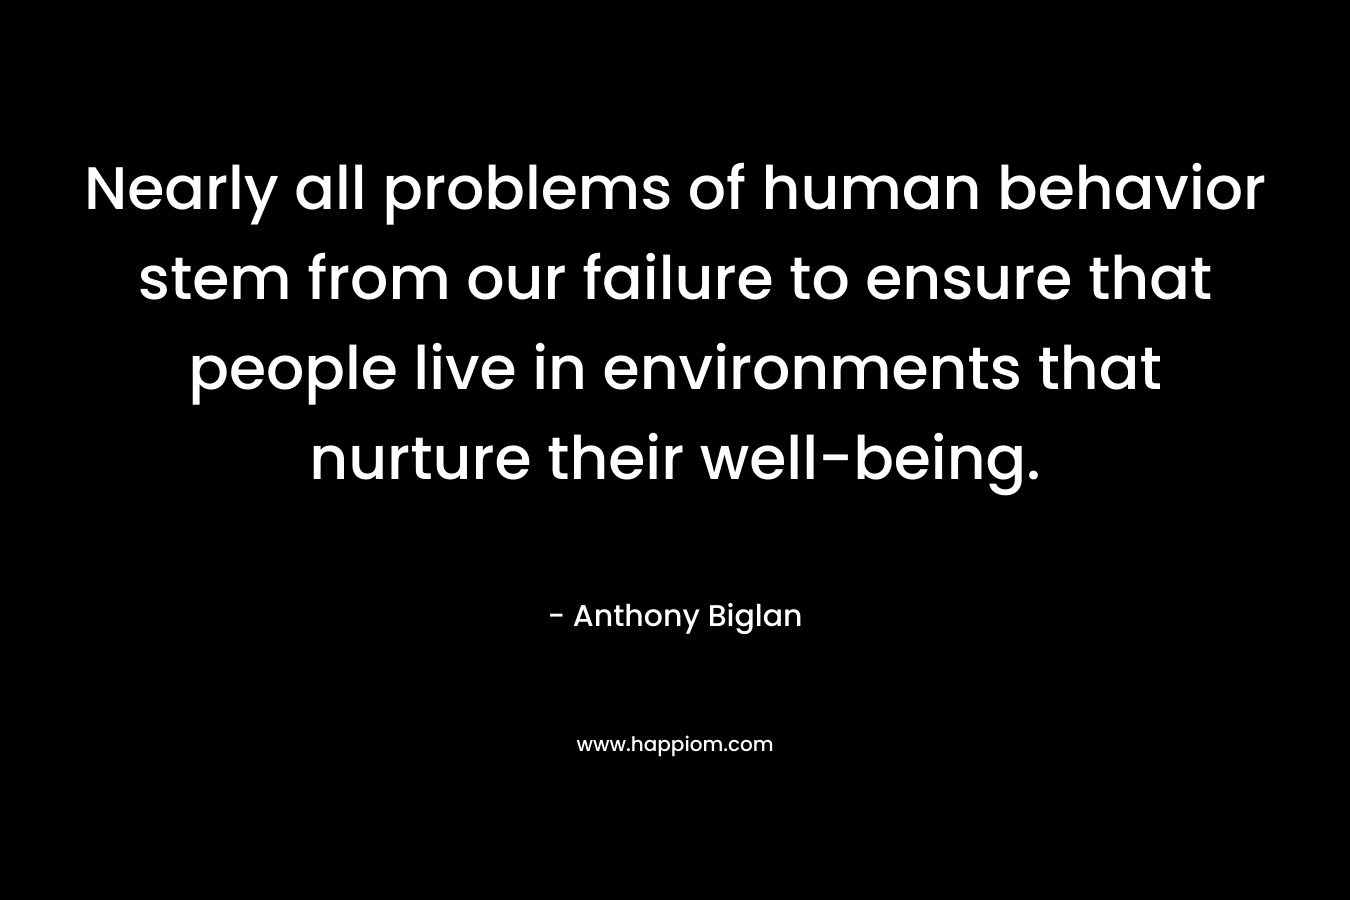 Nearly all problems of human behavior stem from our failure to ensure that people live in environments that nurture their well-being. – Anthony Biglan